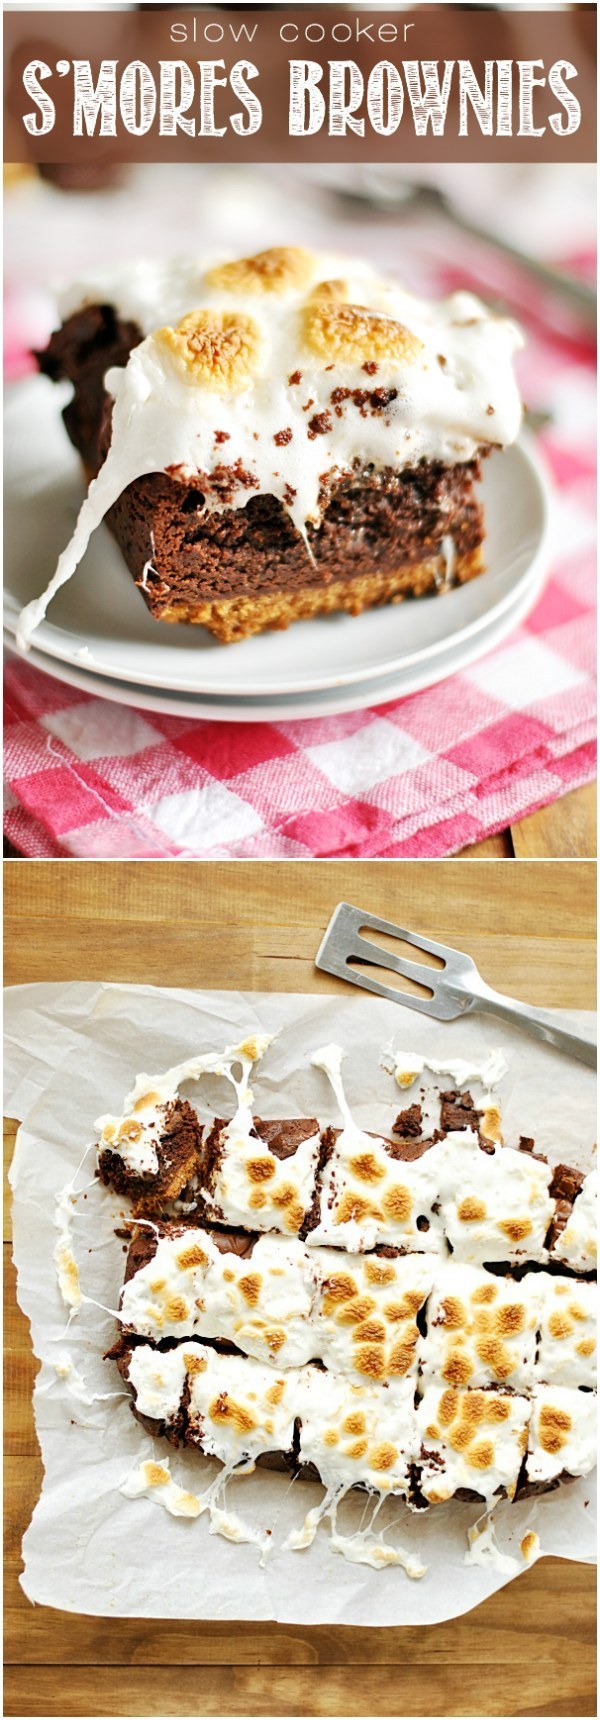 How about some s'mores brownies that are, wait for it....made in the slow cooker!